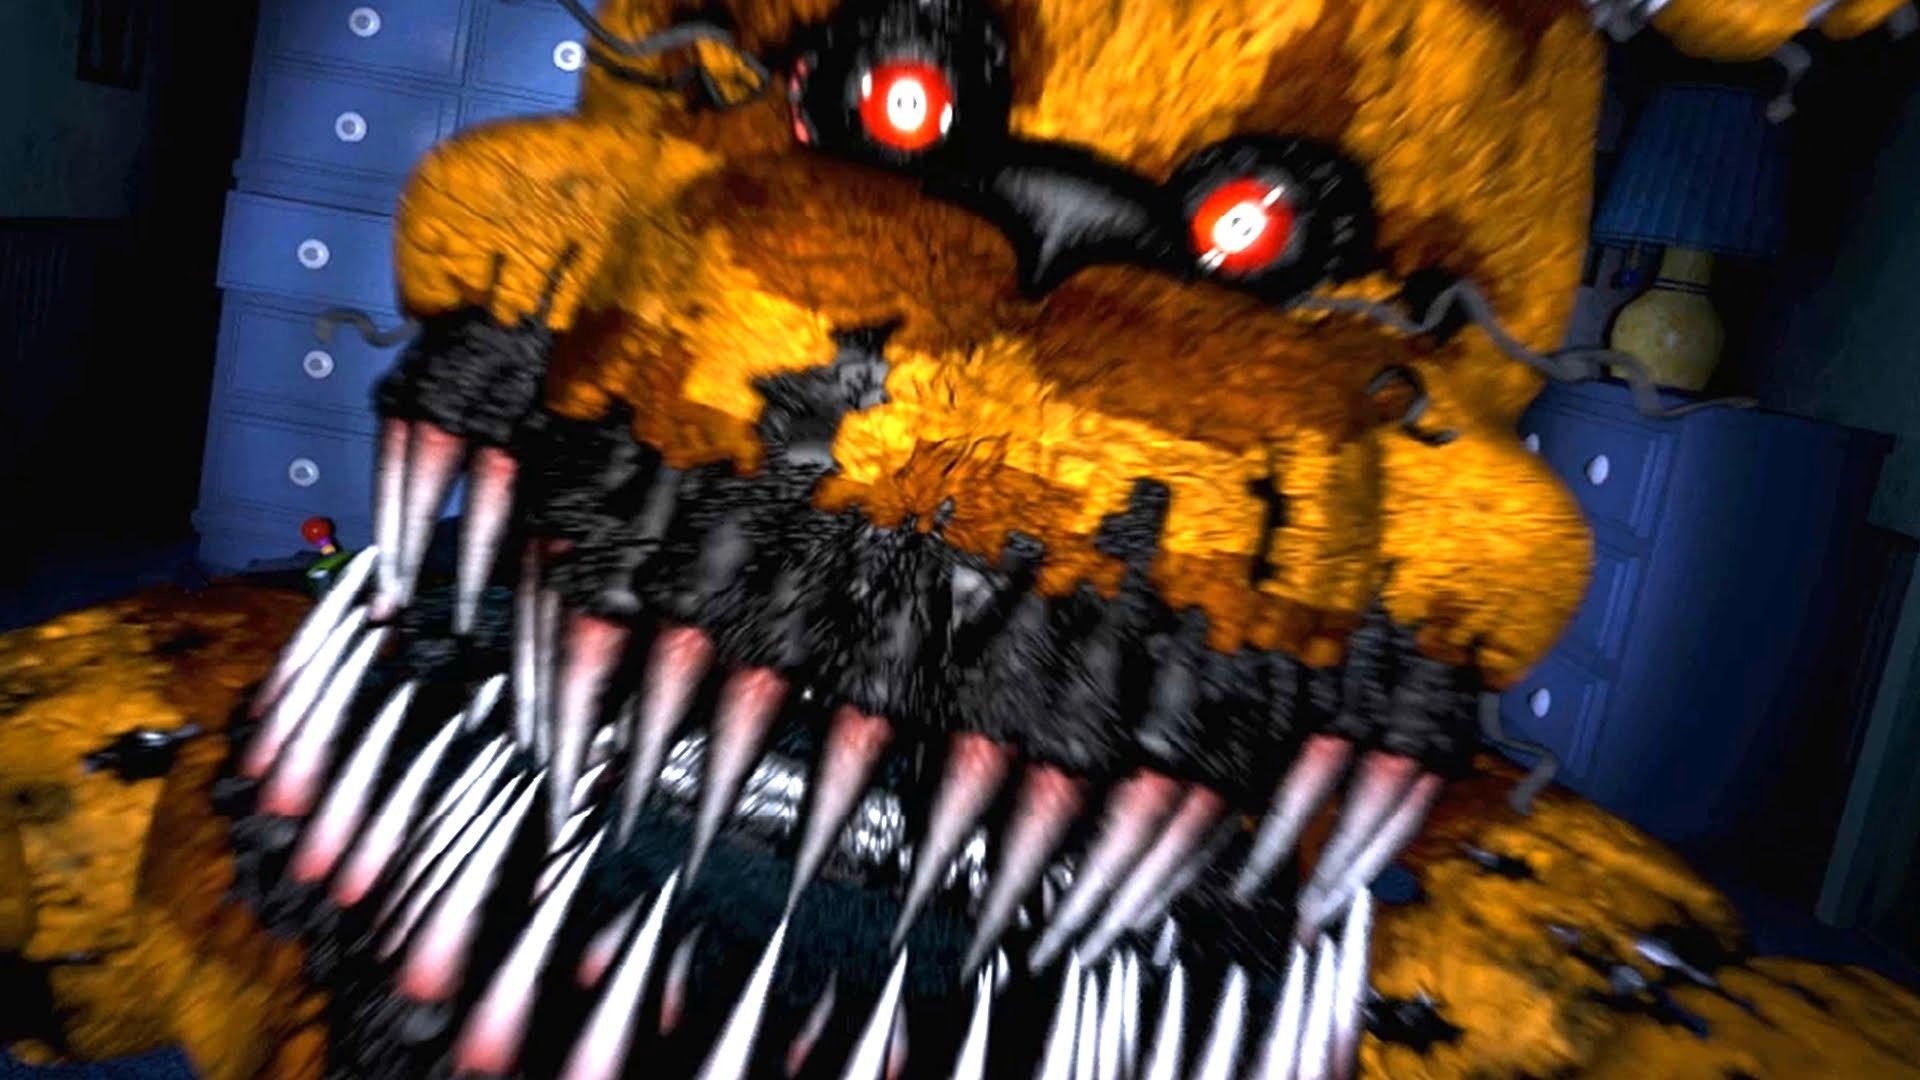 1920x1080 Five Nights at Freddy's images Nightmare fredbear HD wallpaper and  background photos